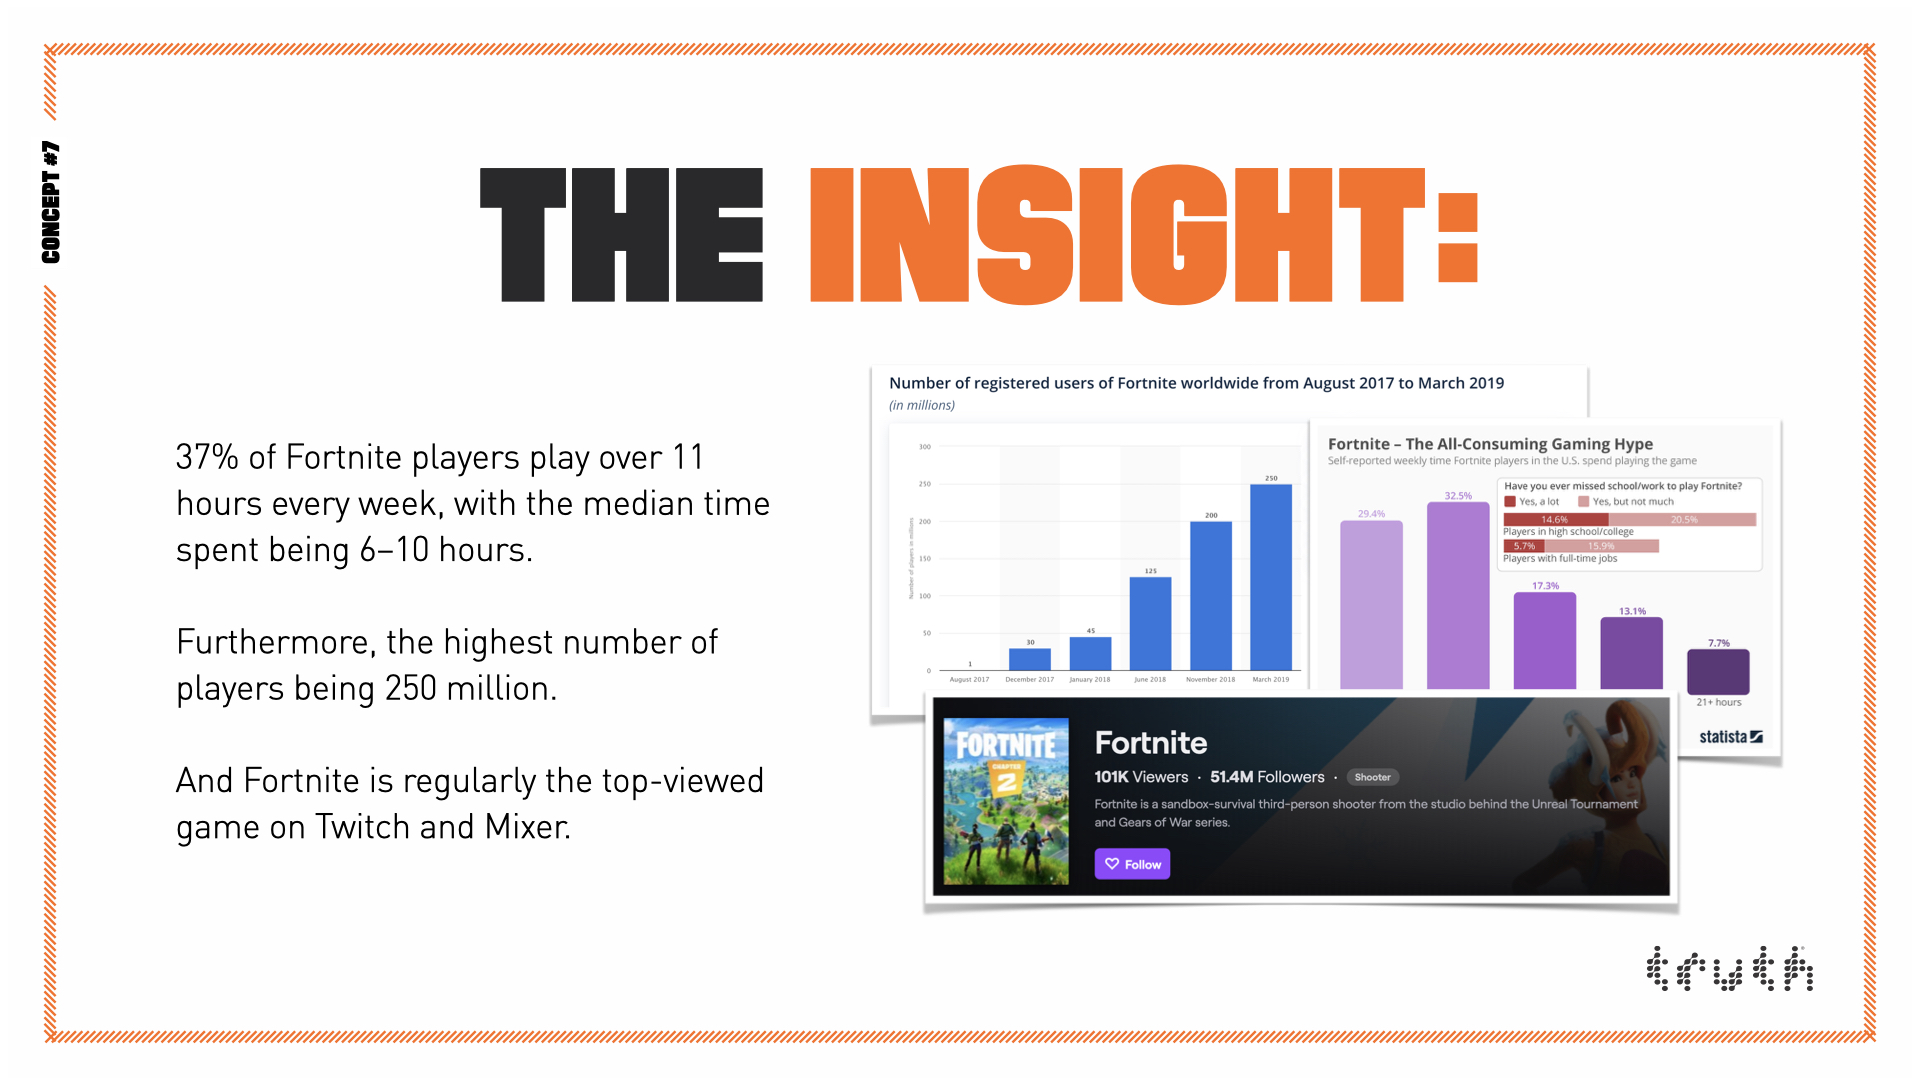 The Insight: 37% of Fortnite players play over 11 hours every week, with the median time spent being 6 to 10 hours. Furthermore, the highest number of players being 250 million. And Fortnite is regularly the top-viewed game on Twitch and Mixer.